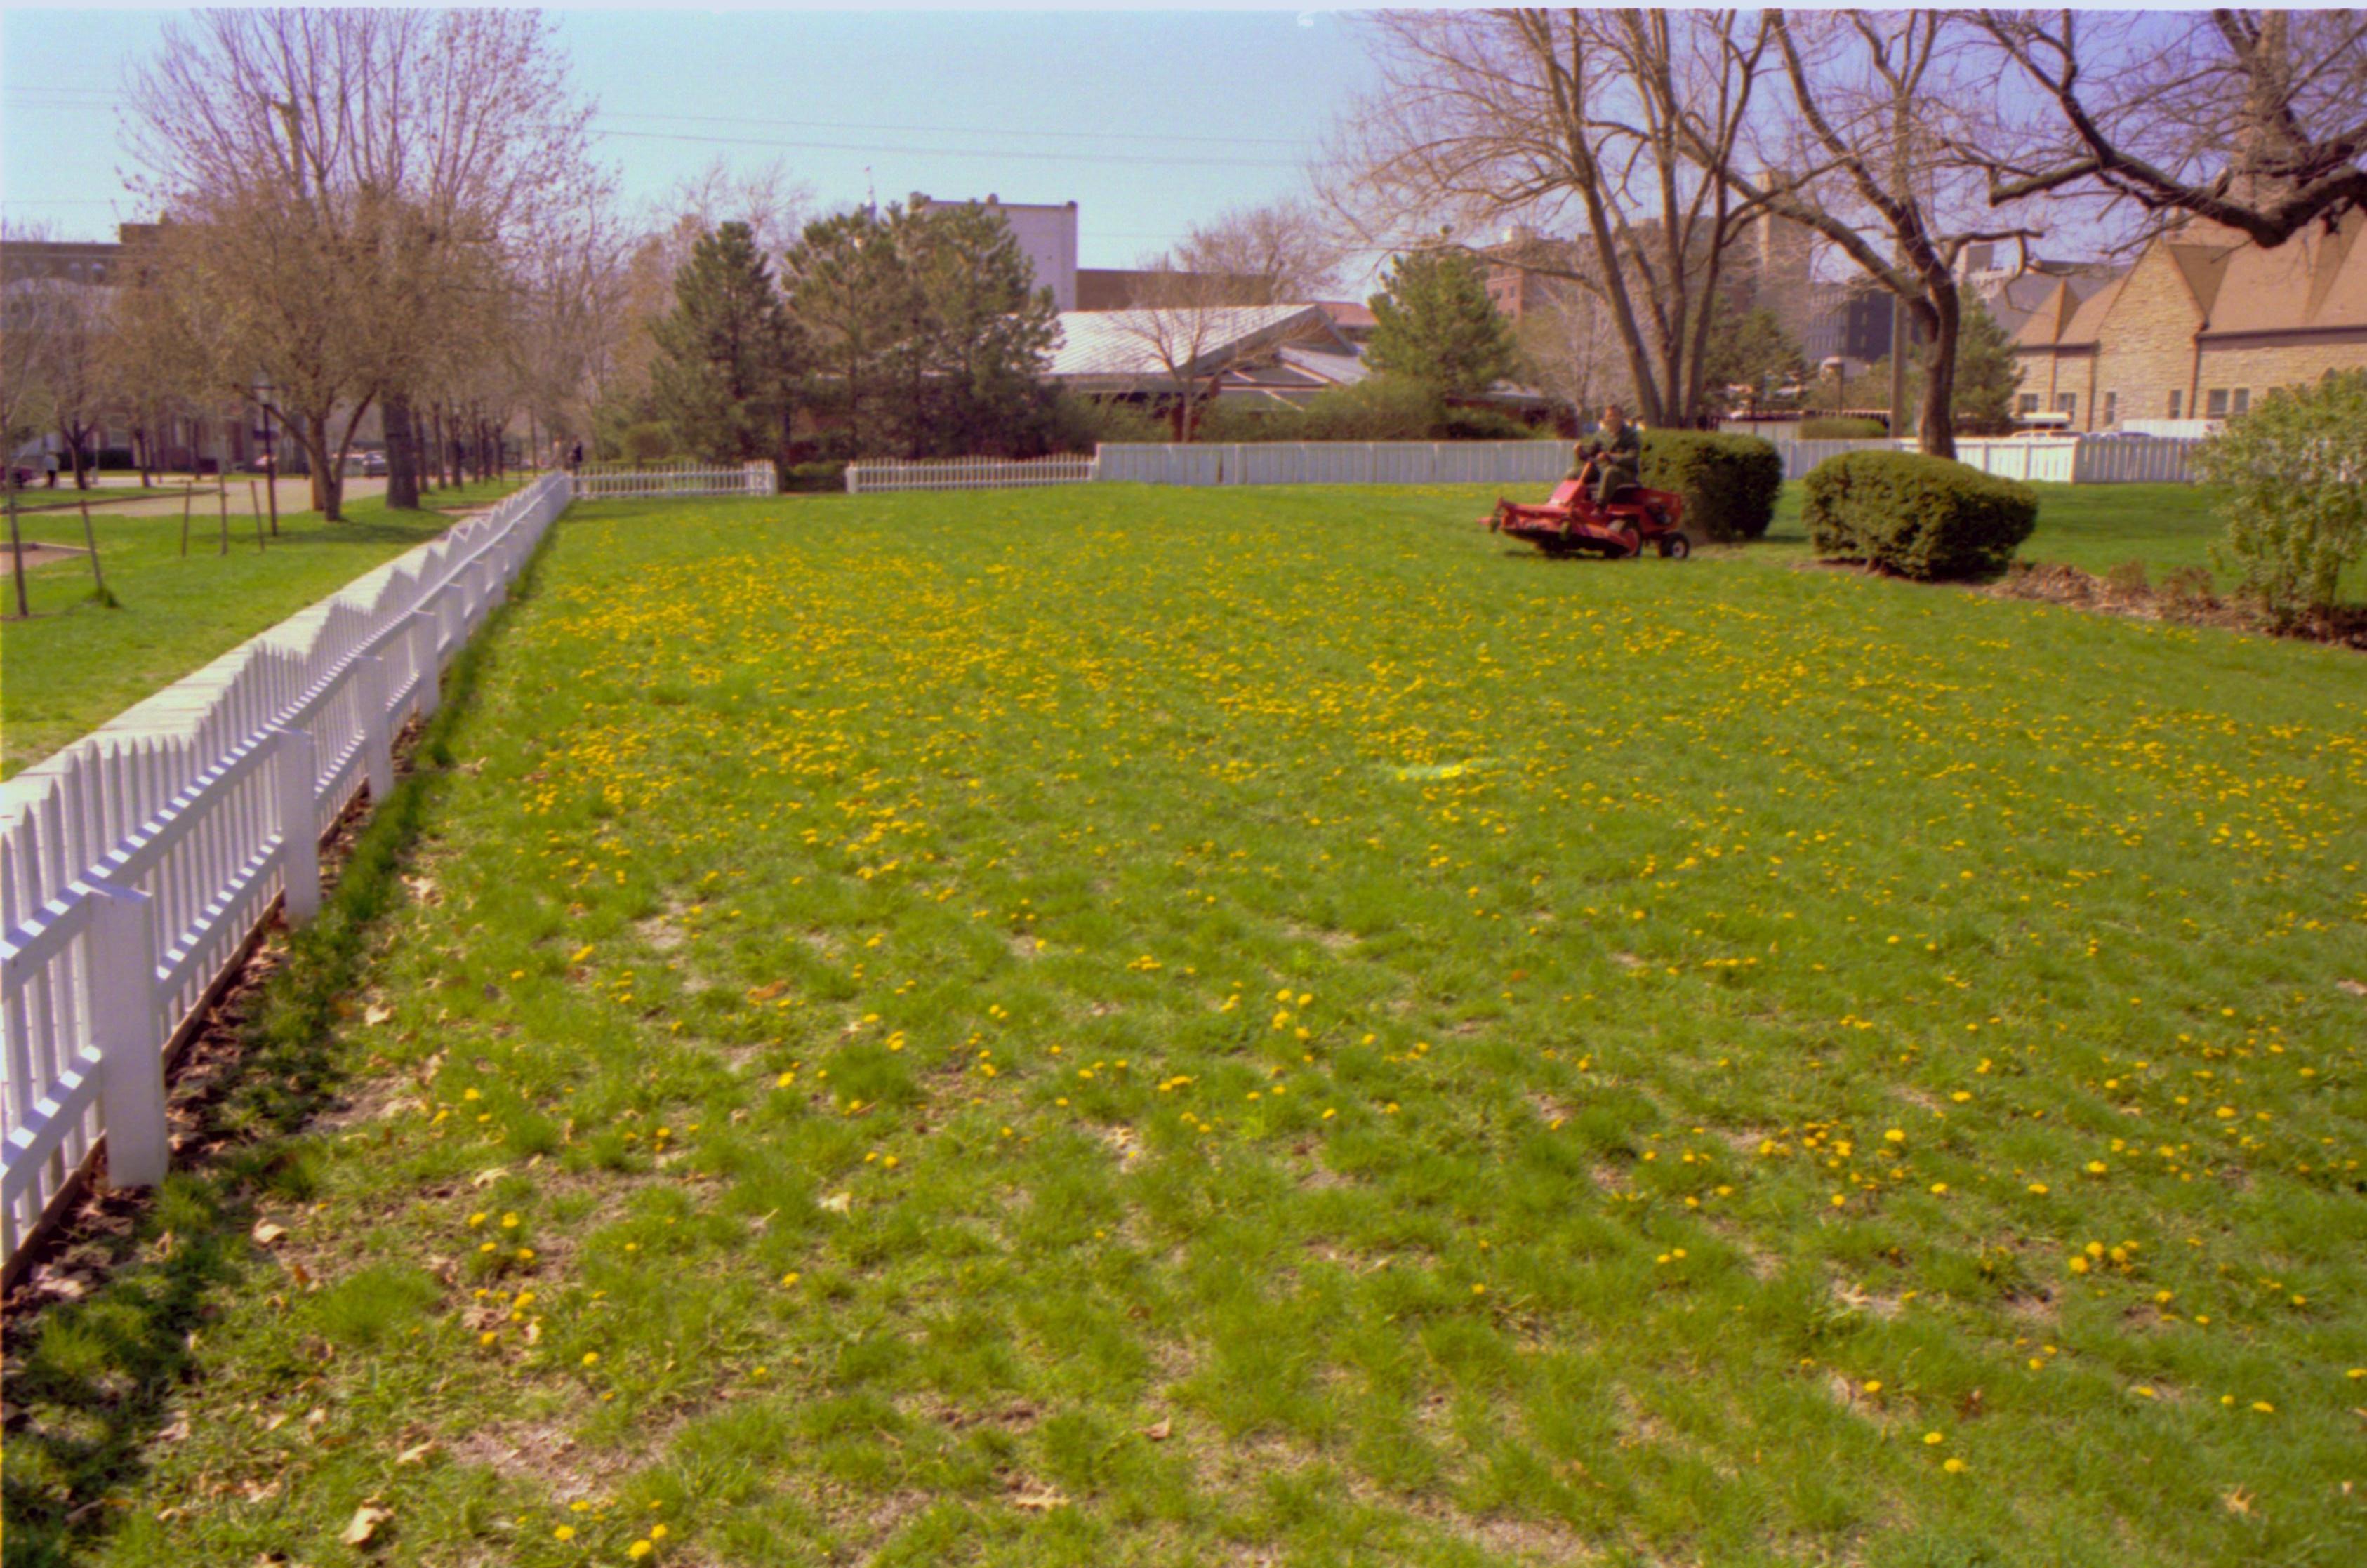 NA 6; 19A; Lawns and trees around park, late 1980s Interpritation, Trees